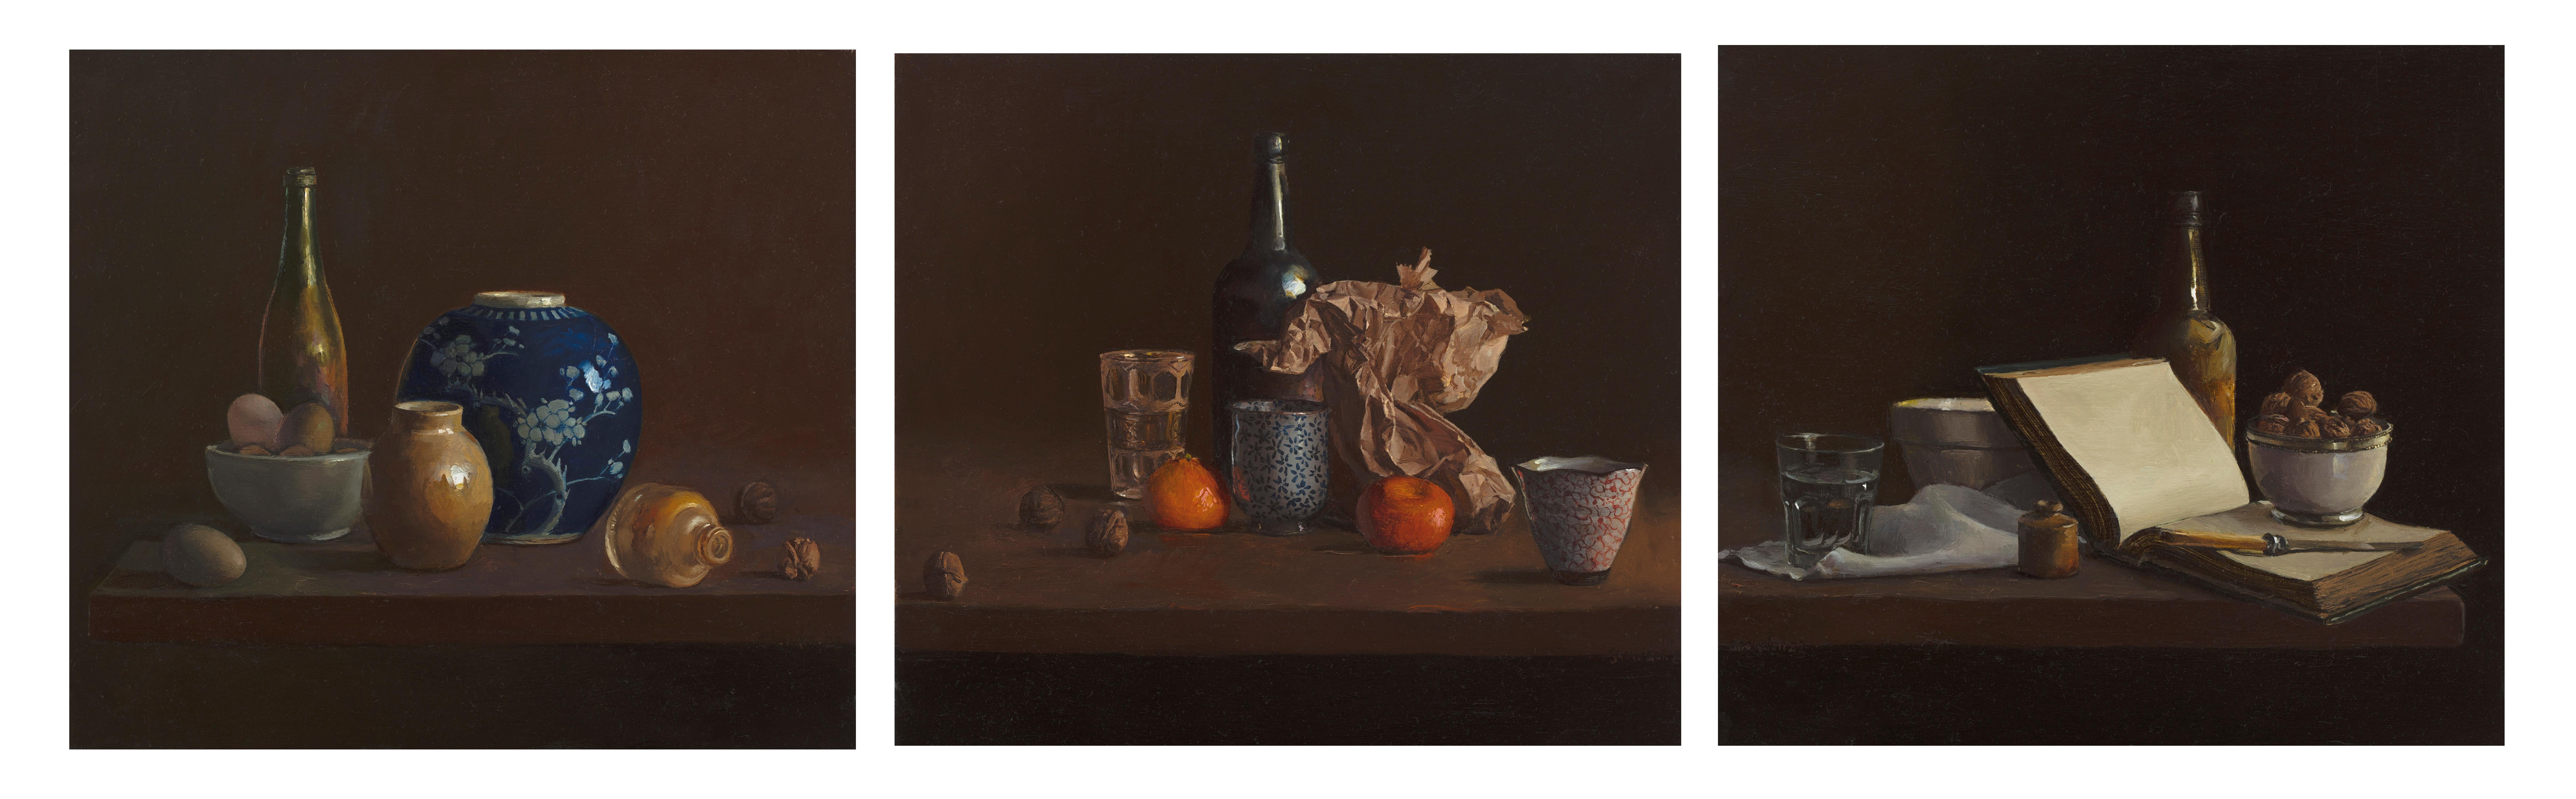 Breathtaking still life triptych by experienced Australian artist Tim Snowdon. The Three Bottles triptych showcases the tremendous skill of the painter rendering glass, fabric, and ceramics in a classic banquet scene. Each of the three paintings on